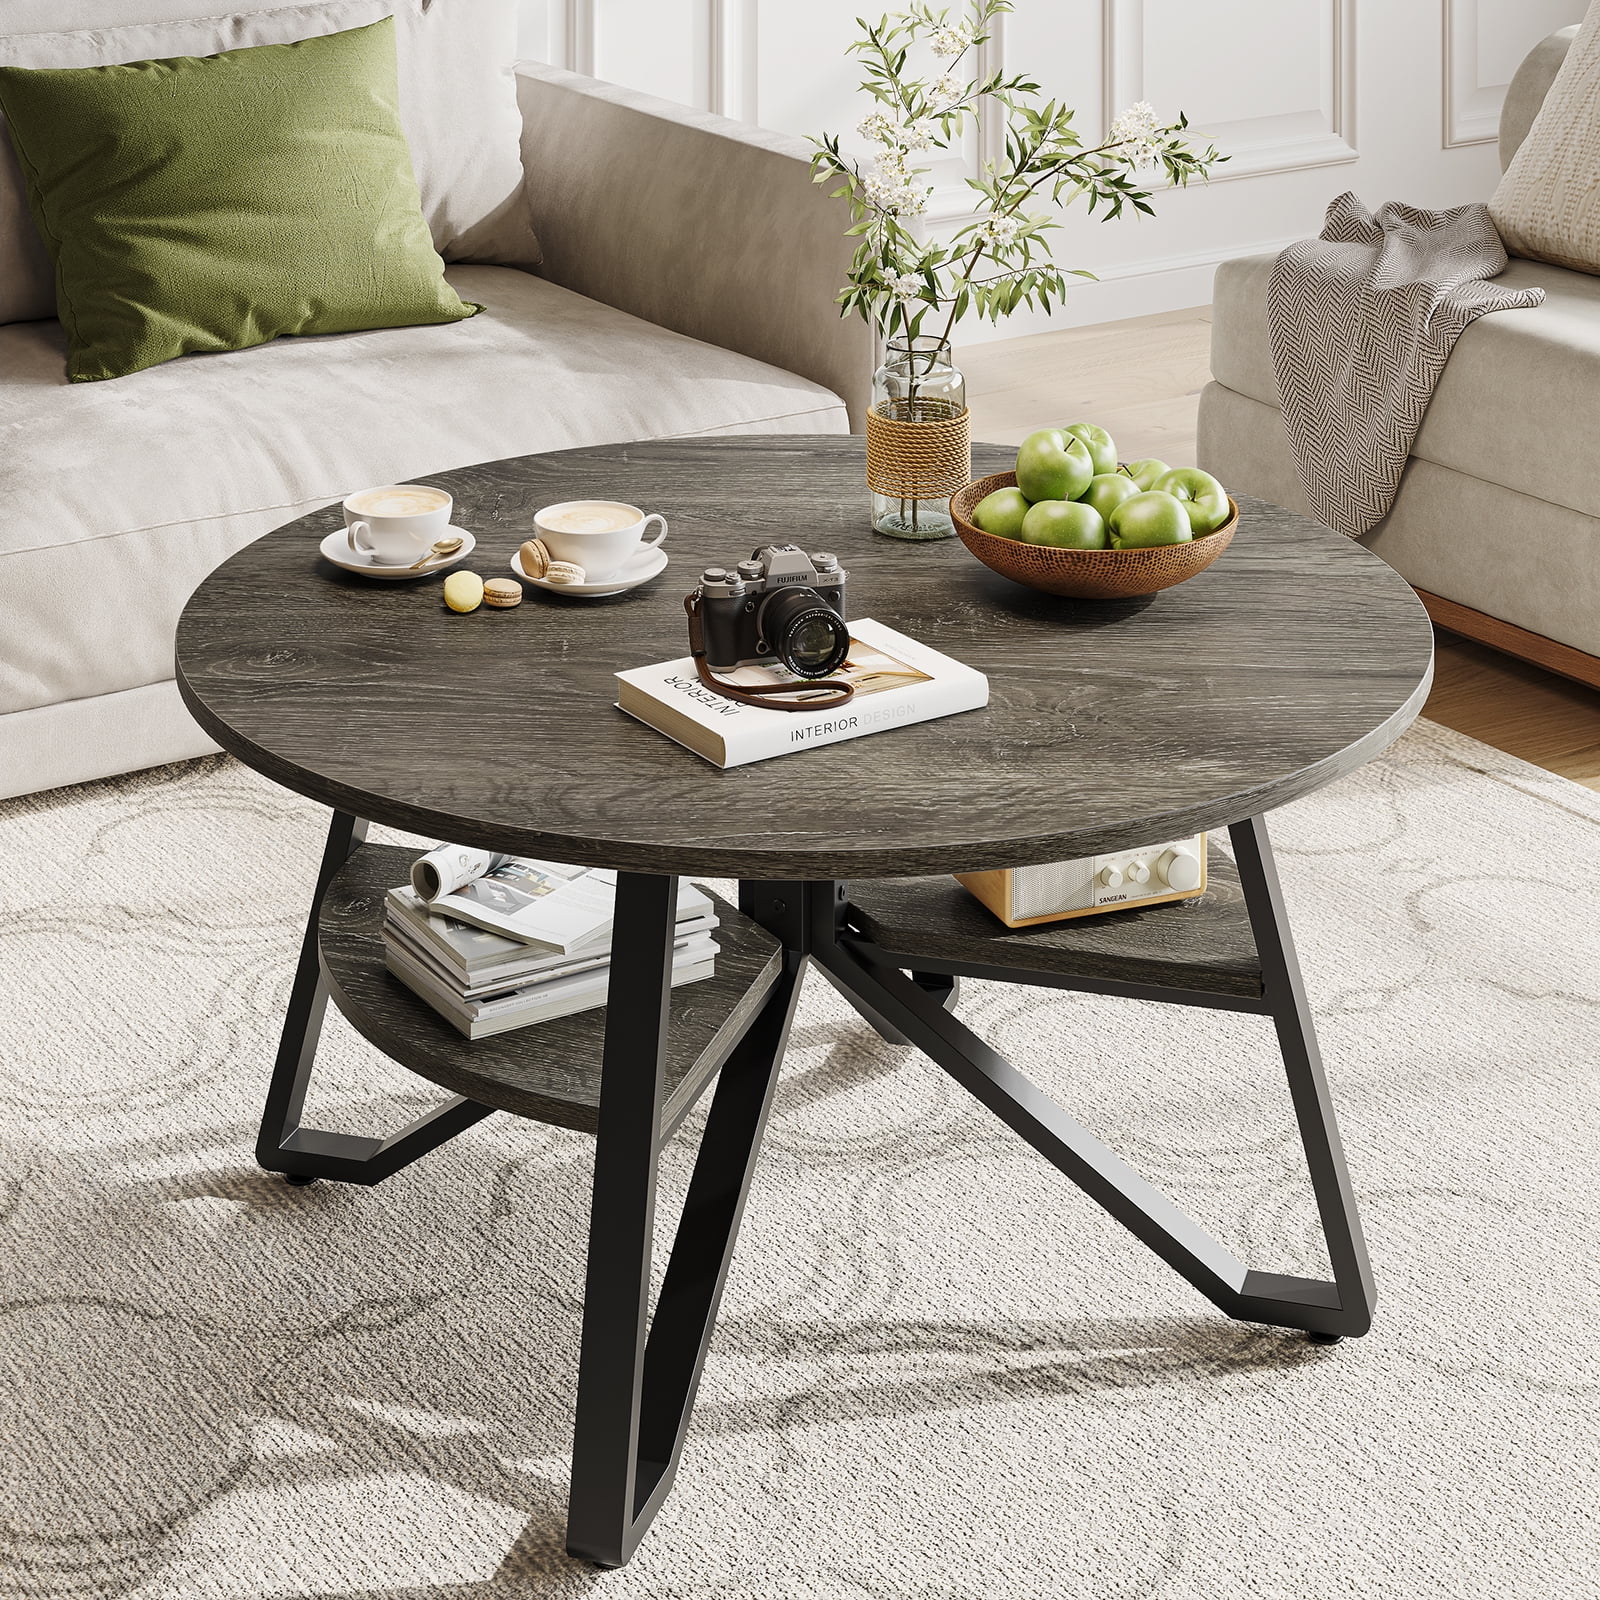 Bestier Round Coffee Table with Storage, Living Room Tables with Sturdy  Metal Legs, Retro Grey Oak